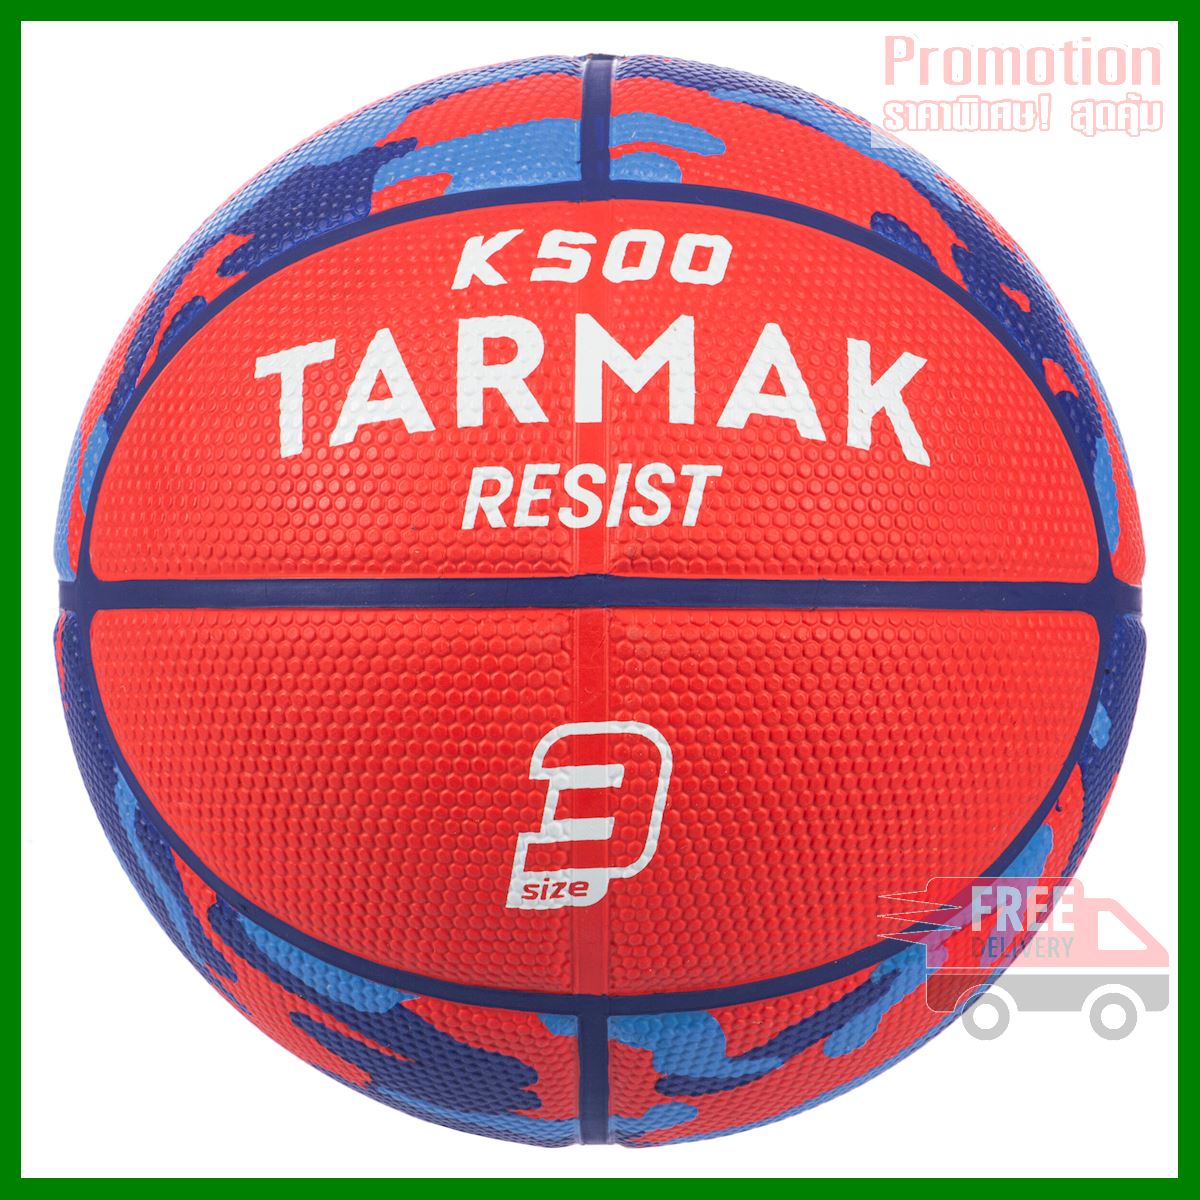 Kids' Size 3 Basketball K500 - RedFor children up to age 6.